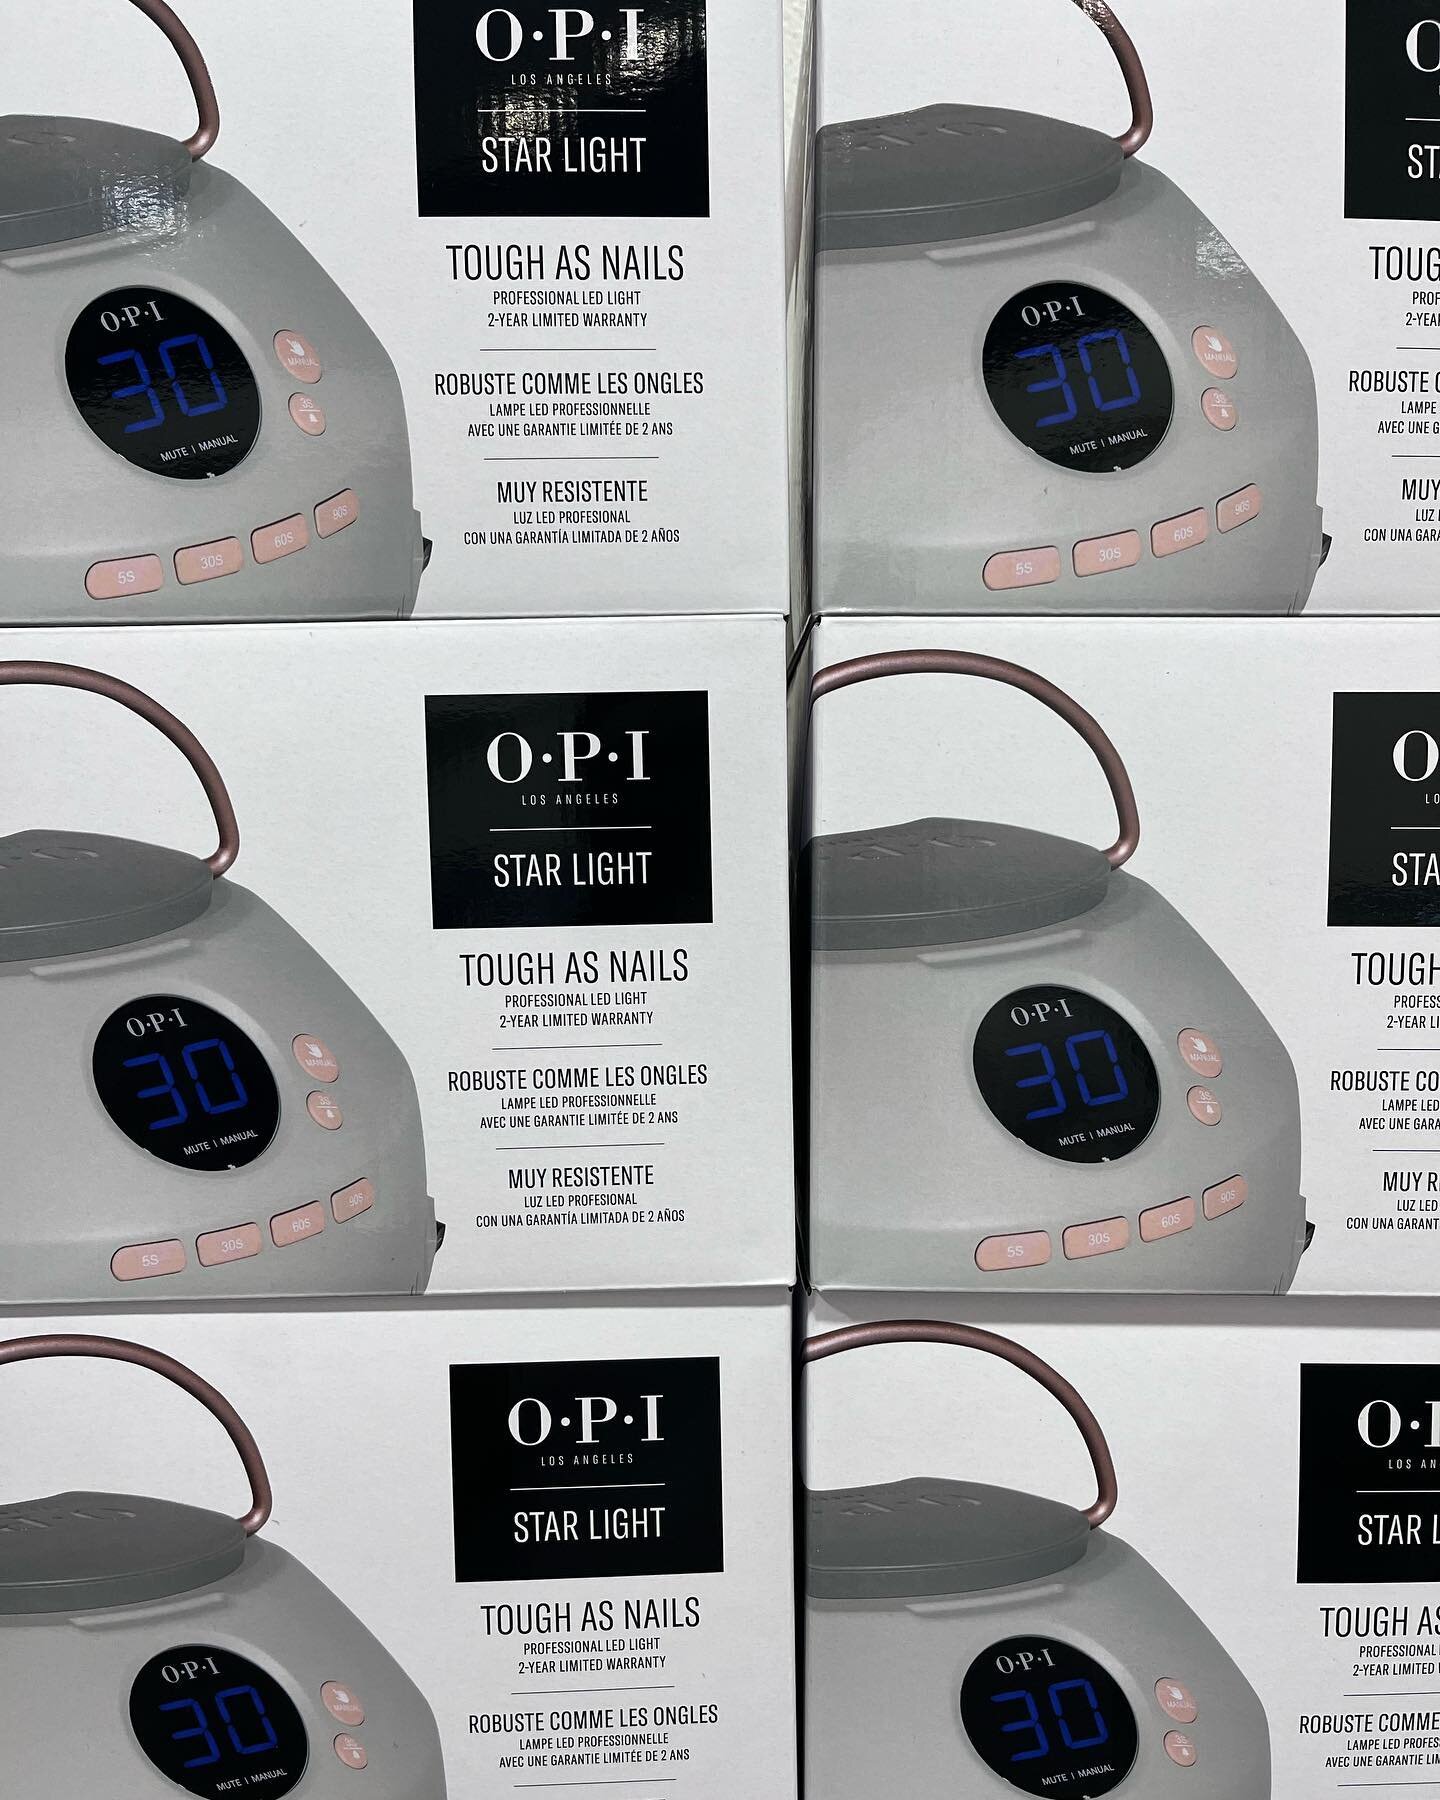 Starlight Starbright - @opi OPI released a new curing light #opi #opiobsessed #nails #nailsofinstagram #gelnails